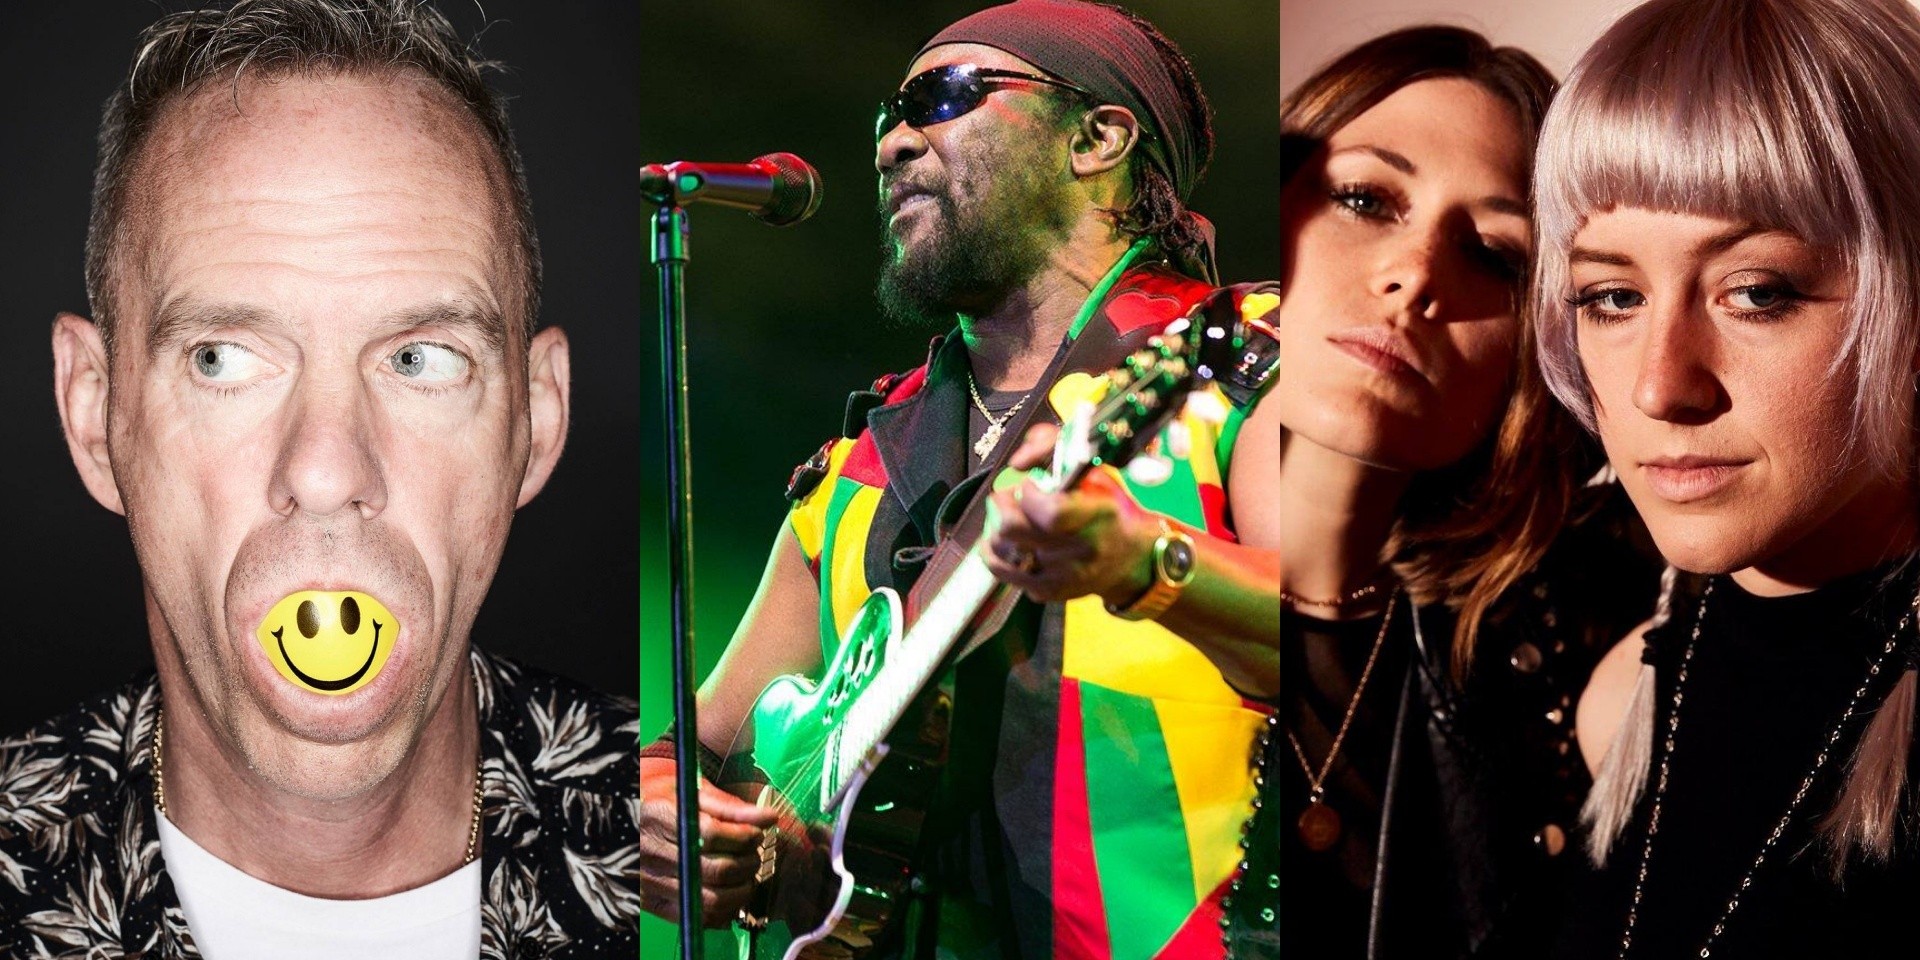 Fatboy Slim, Larkin Poe and Toots and the Maytals added to Singapore Grand Prix line-up